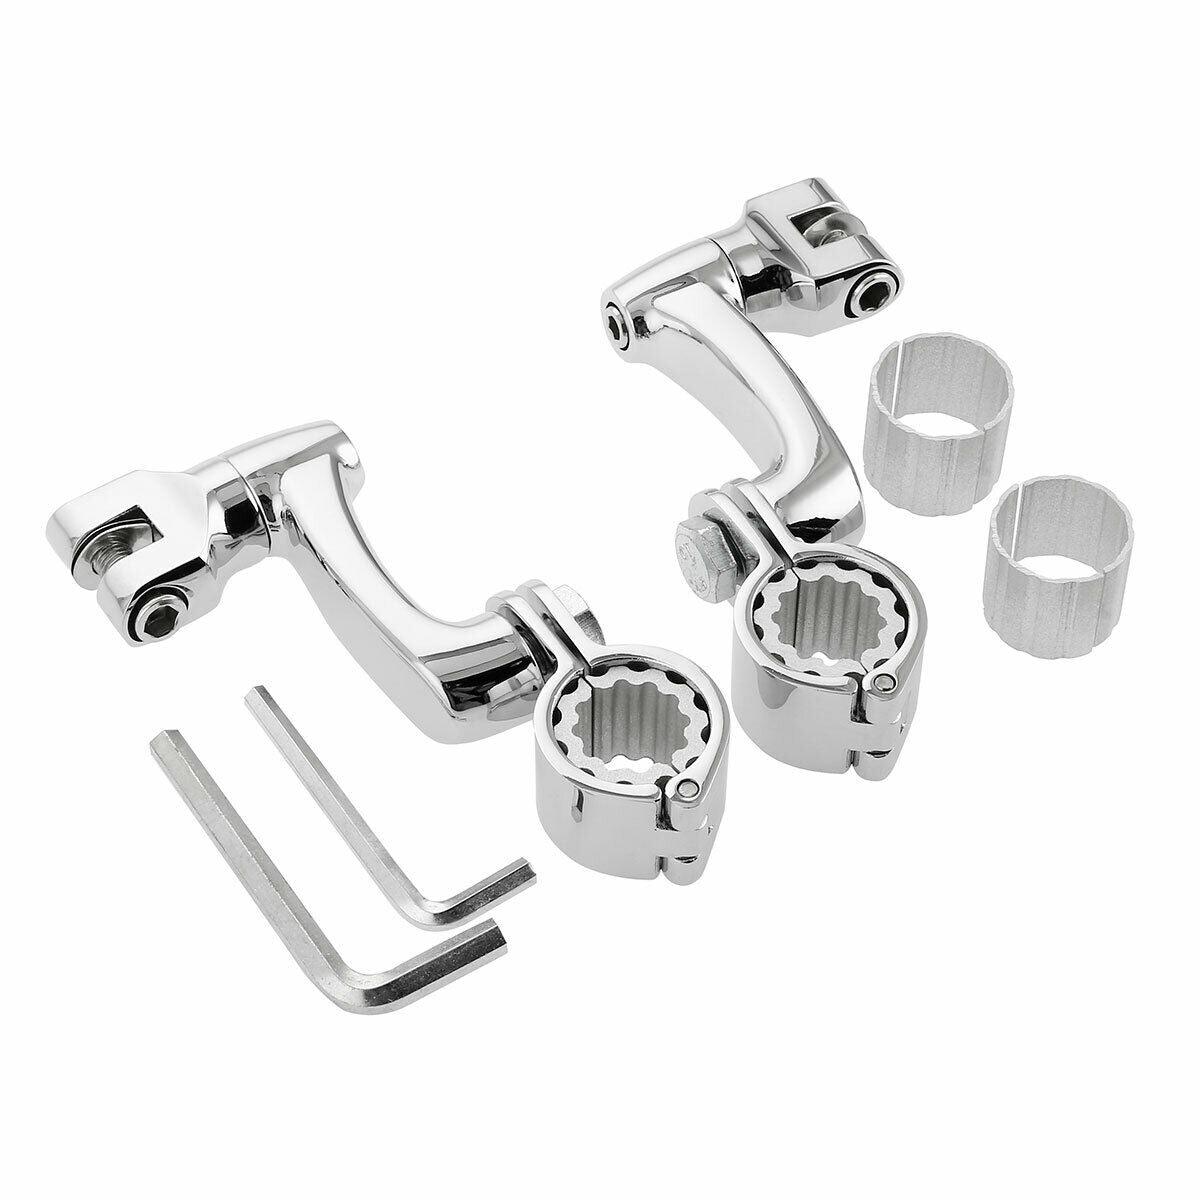 35mm Highway Foot Pegs Mount Clamp Fit For Harley Touring Sportster Dyna Softail - Moto Life Products